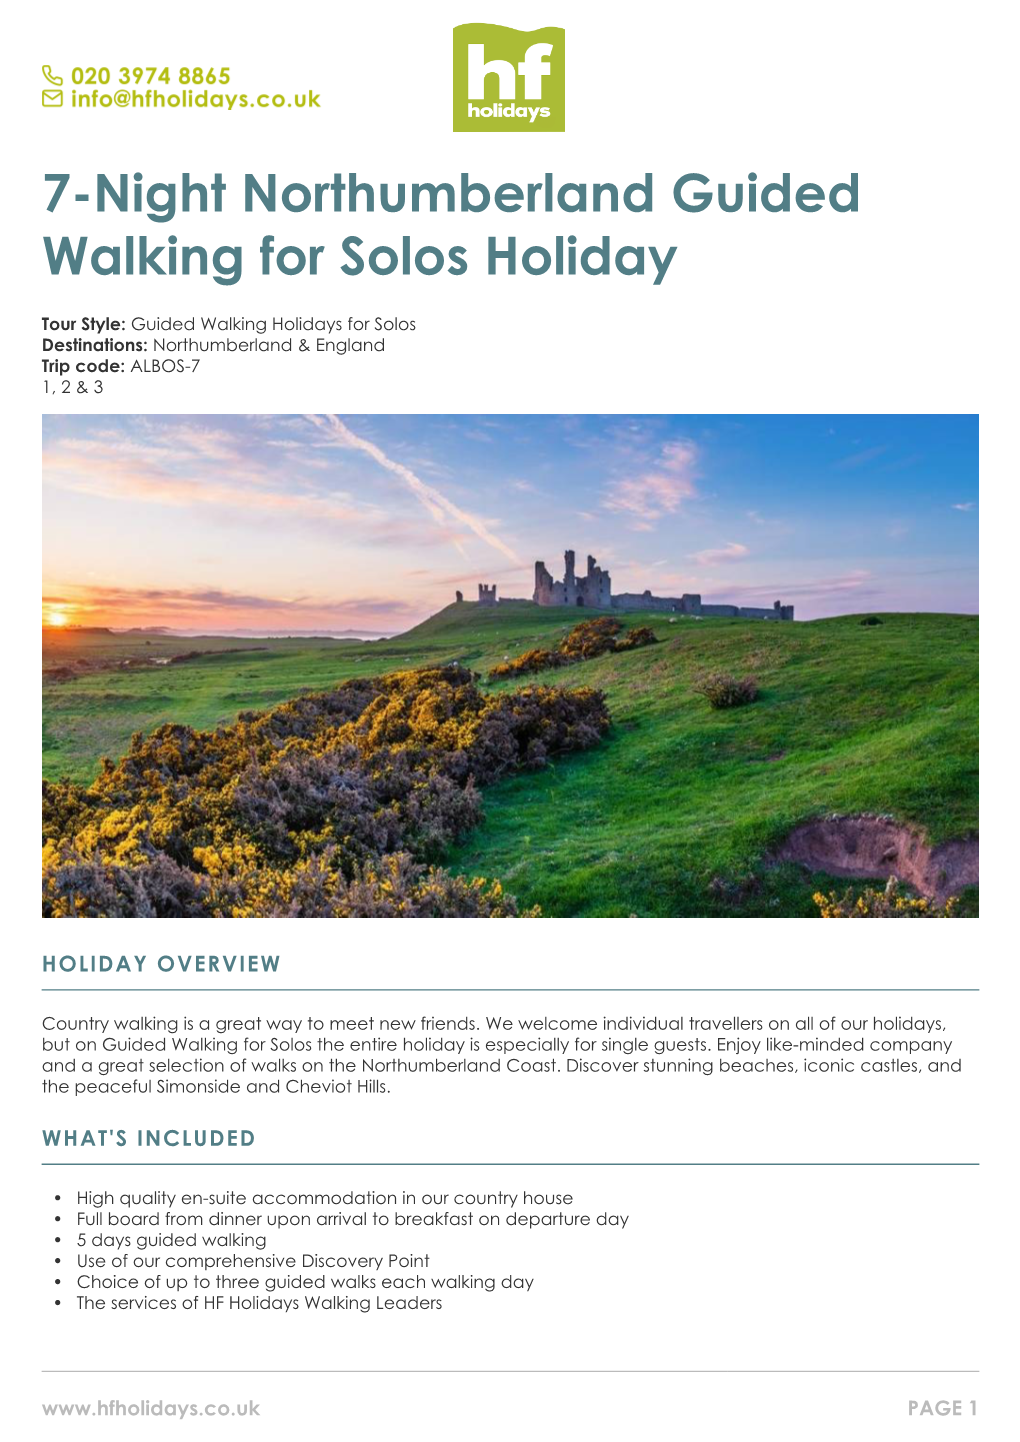 7-Night Northumberland Guided Walking for Solos Holiday